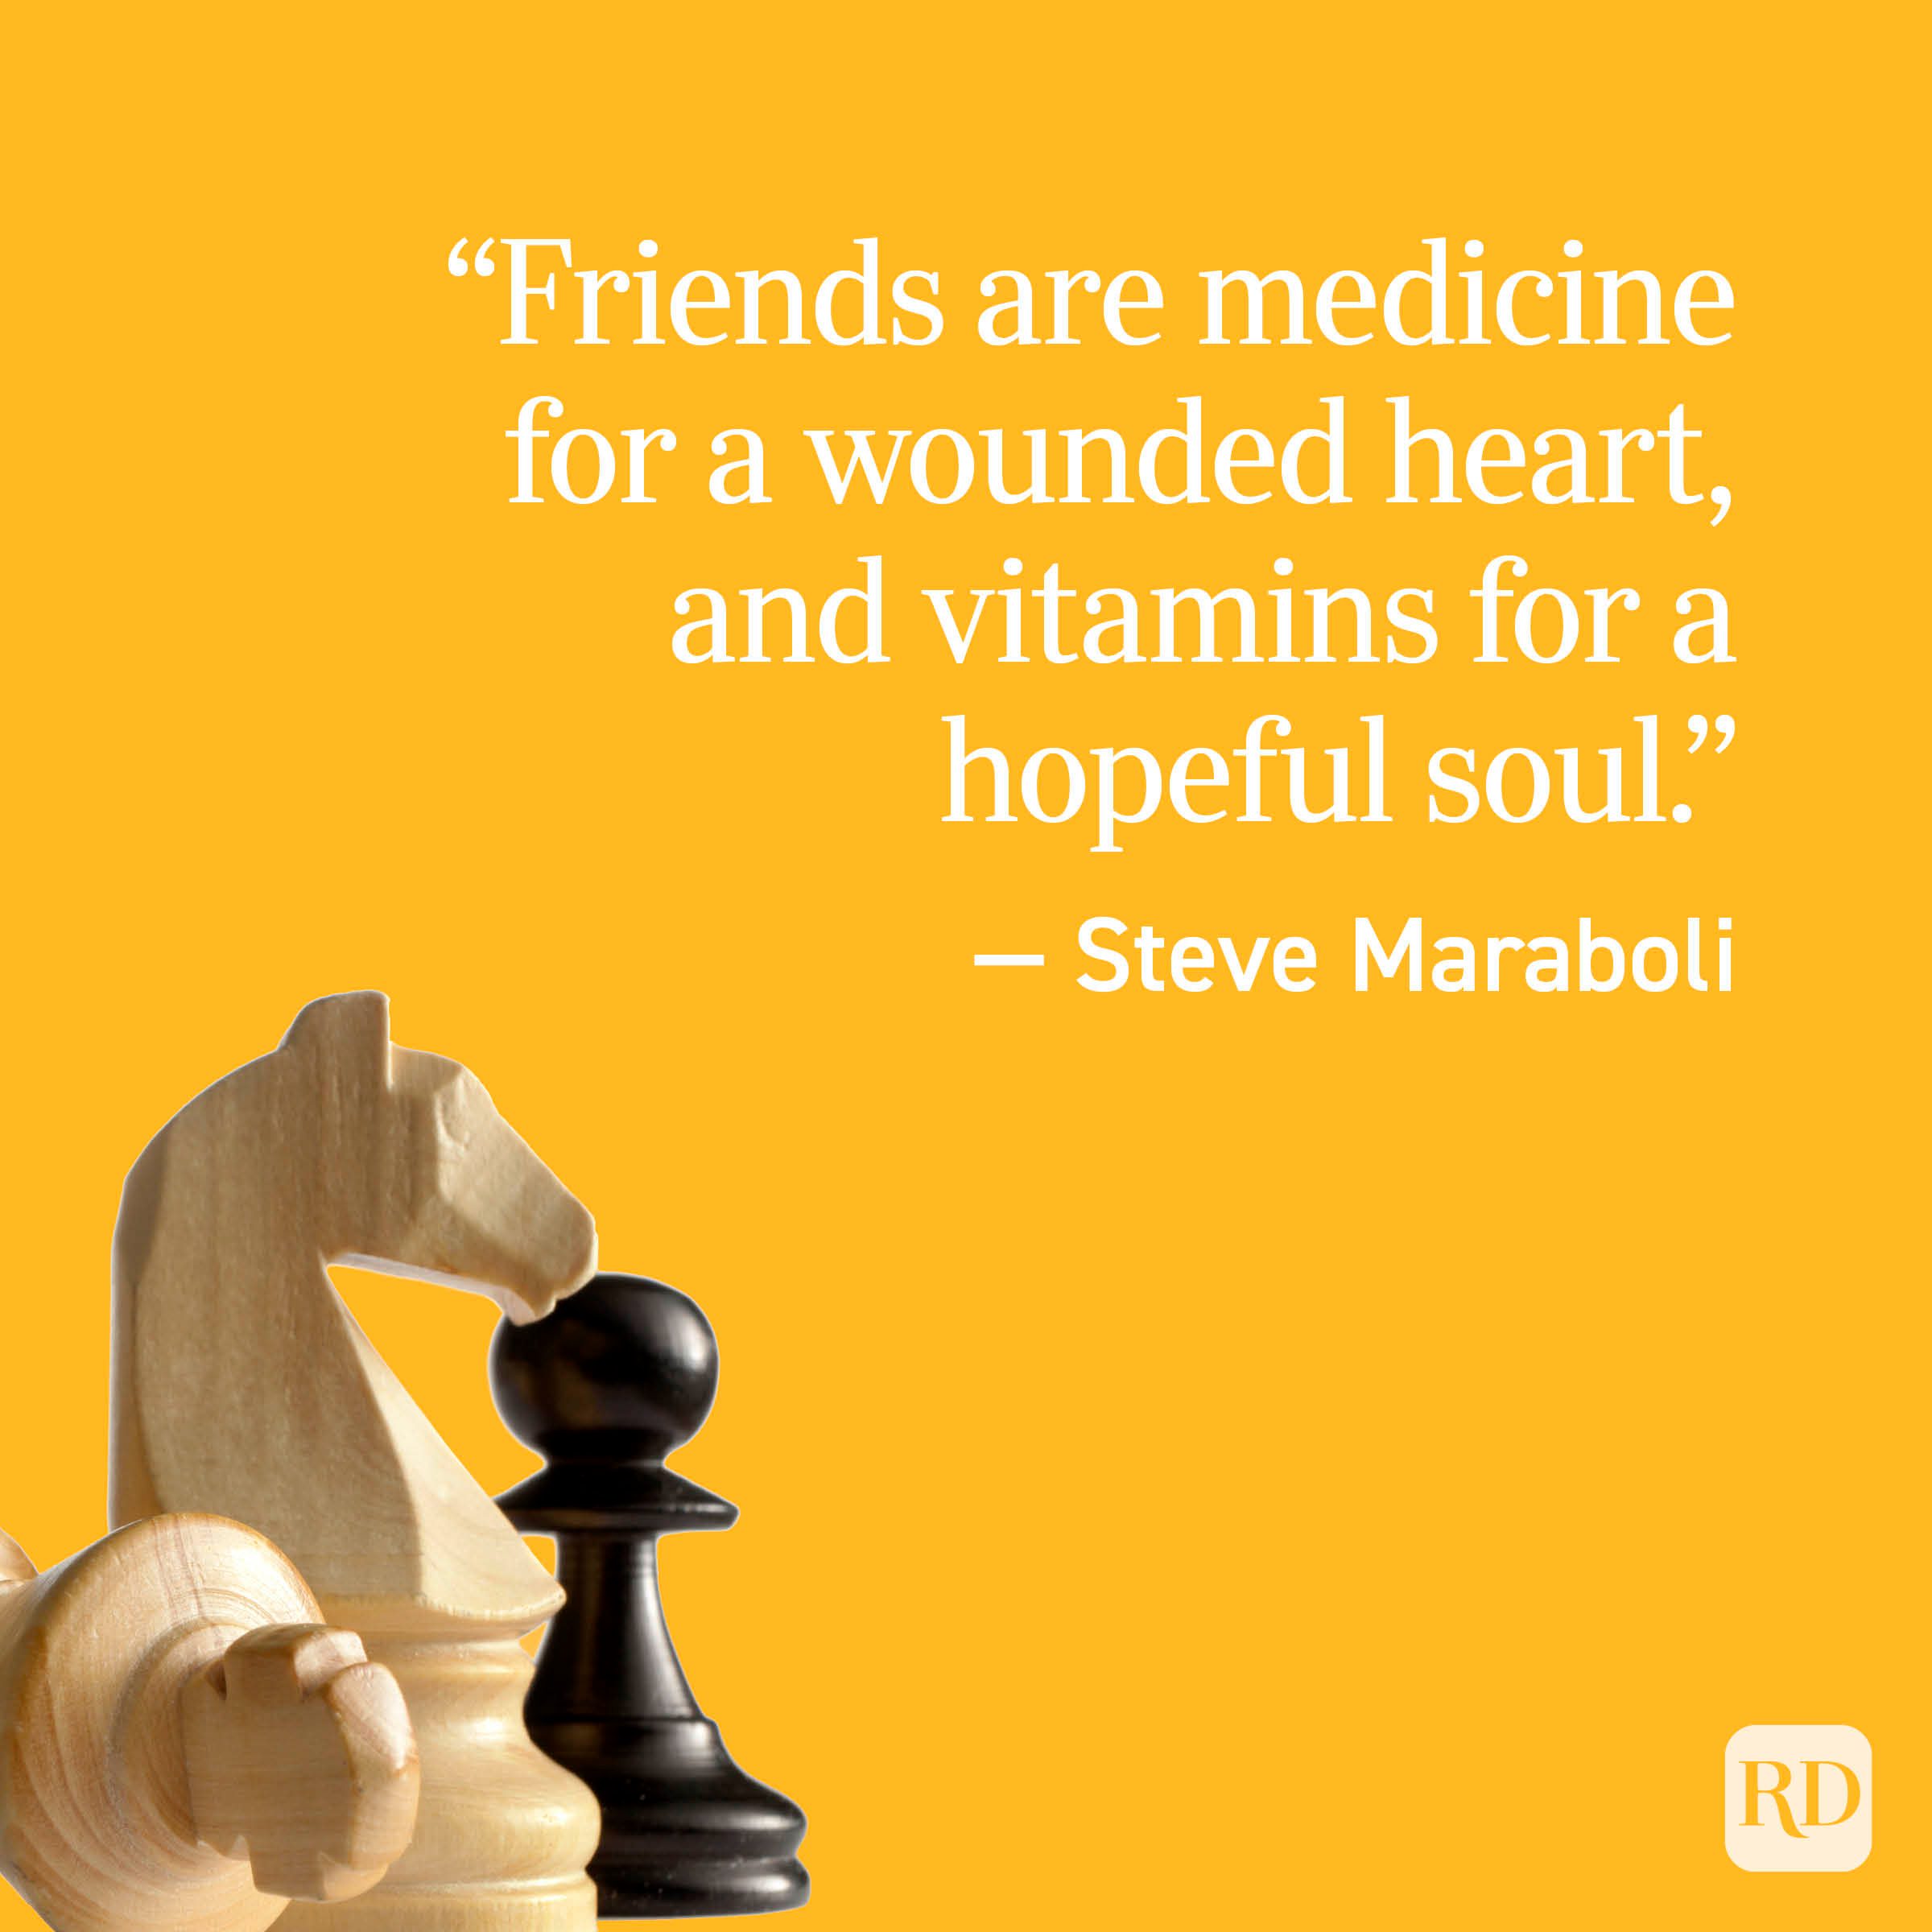 “Friends are medicine for a wounded heart, and vitamins for a hopeful soul.” — Steve Maraboli